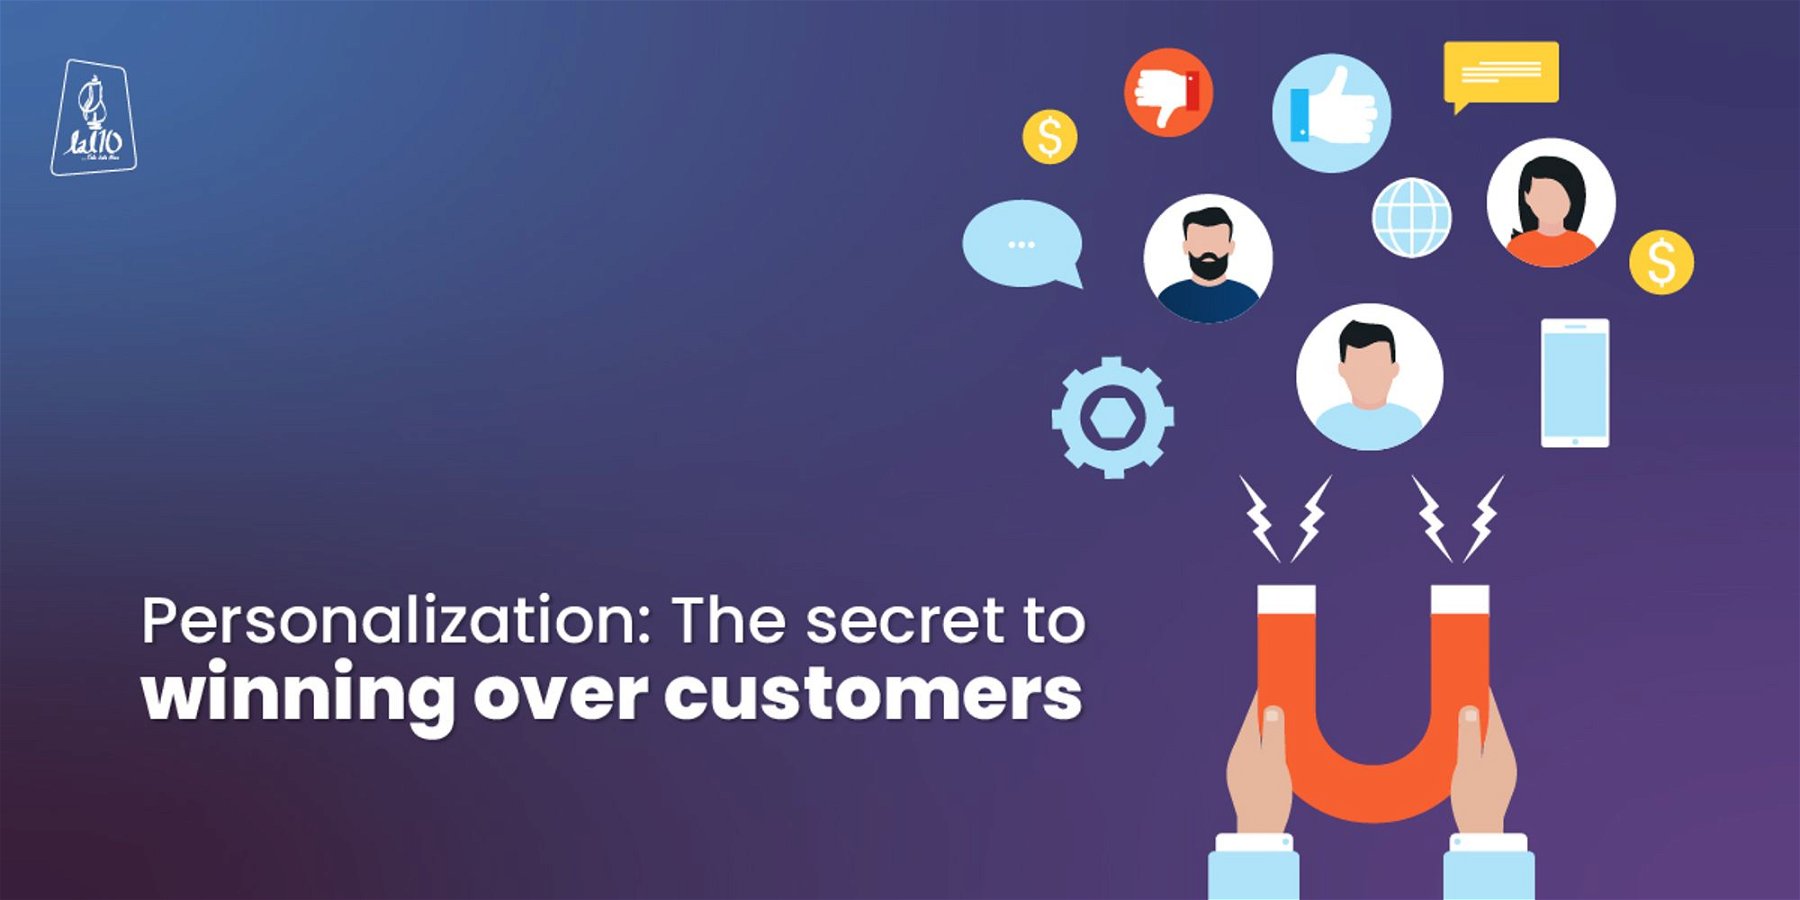 Personalization: The secret to winning over customers